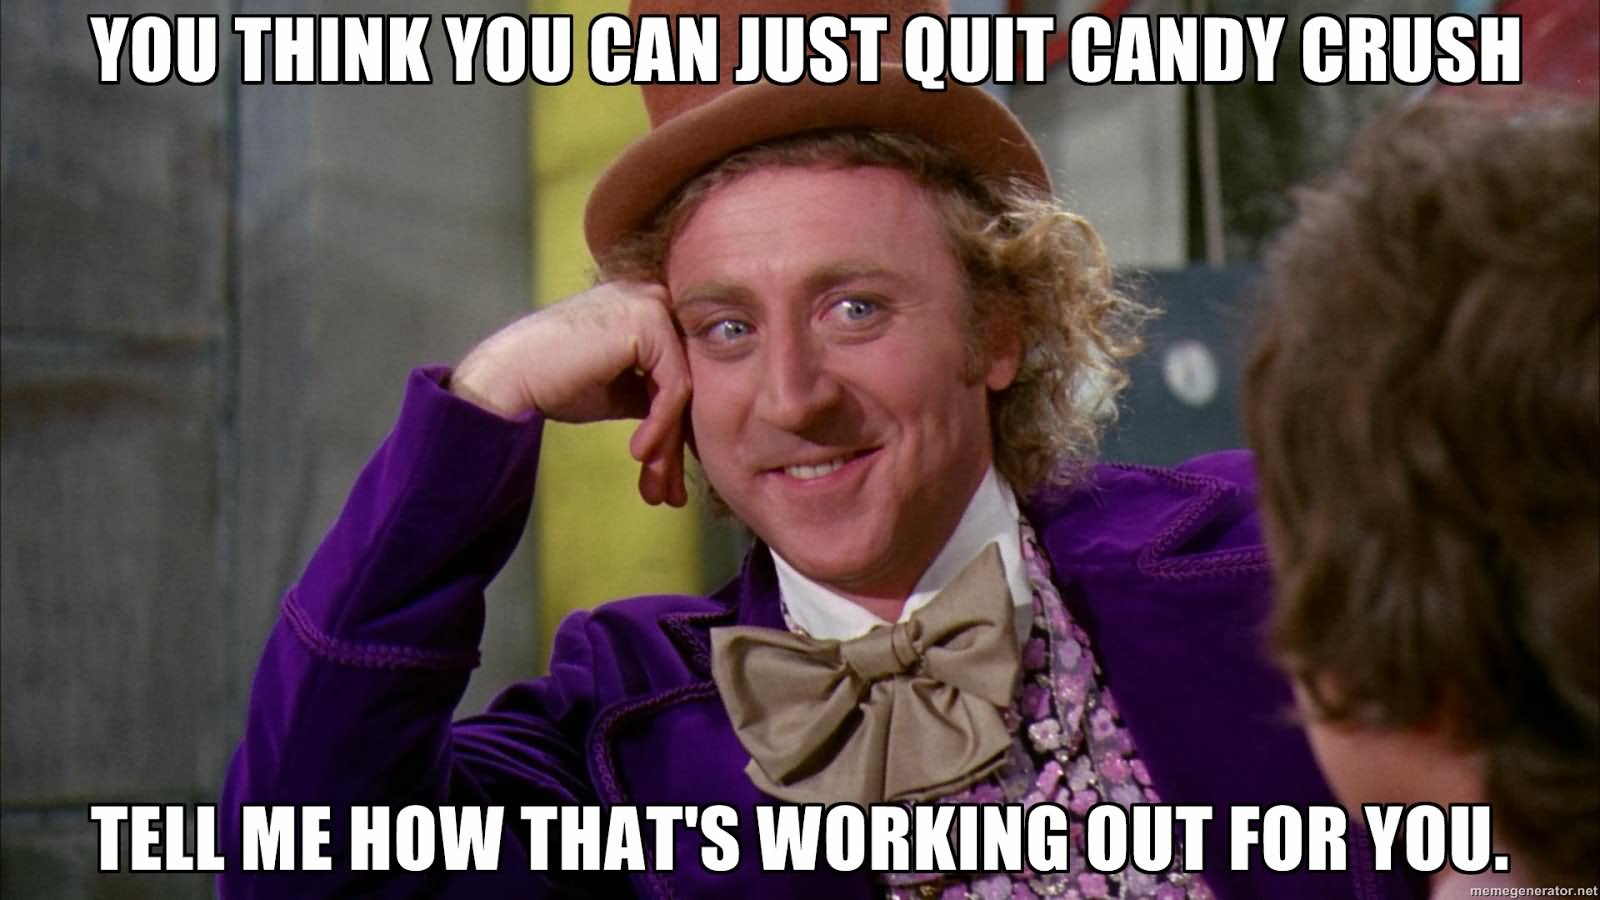 40 Most Funniest Candy Meme Photos And Images That Will Make You Laugh